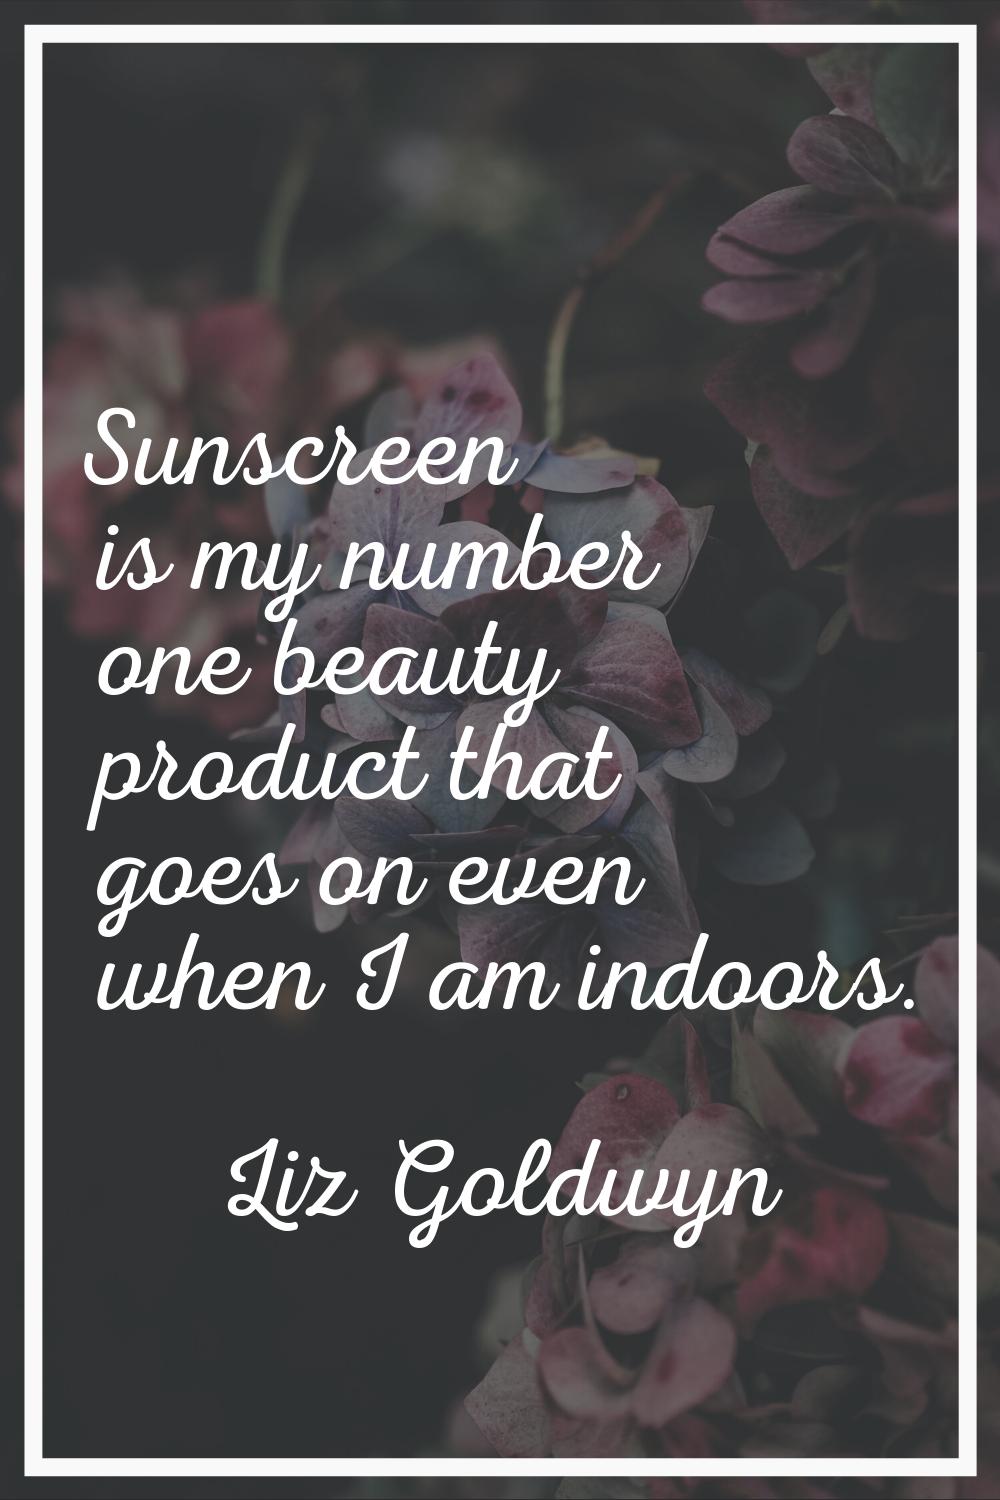 Sunscreen is my number one beauty product that goes on even when I am indoors.